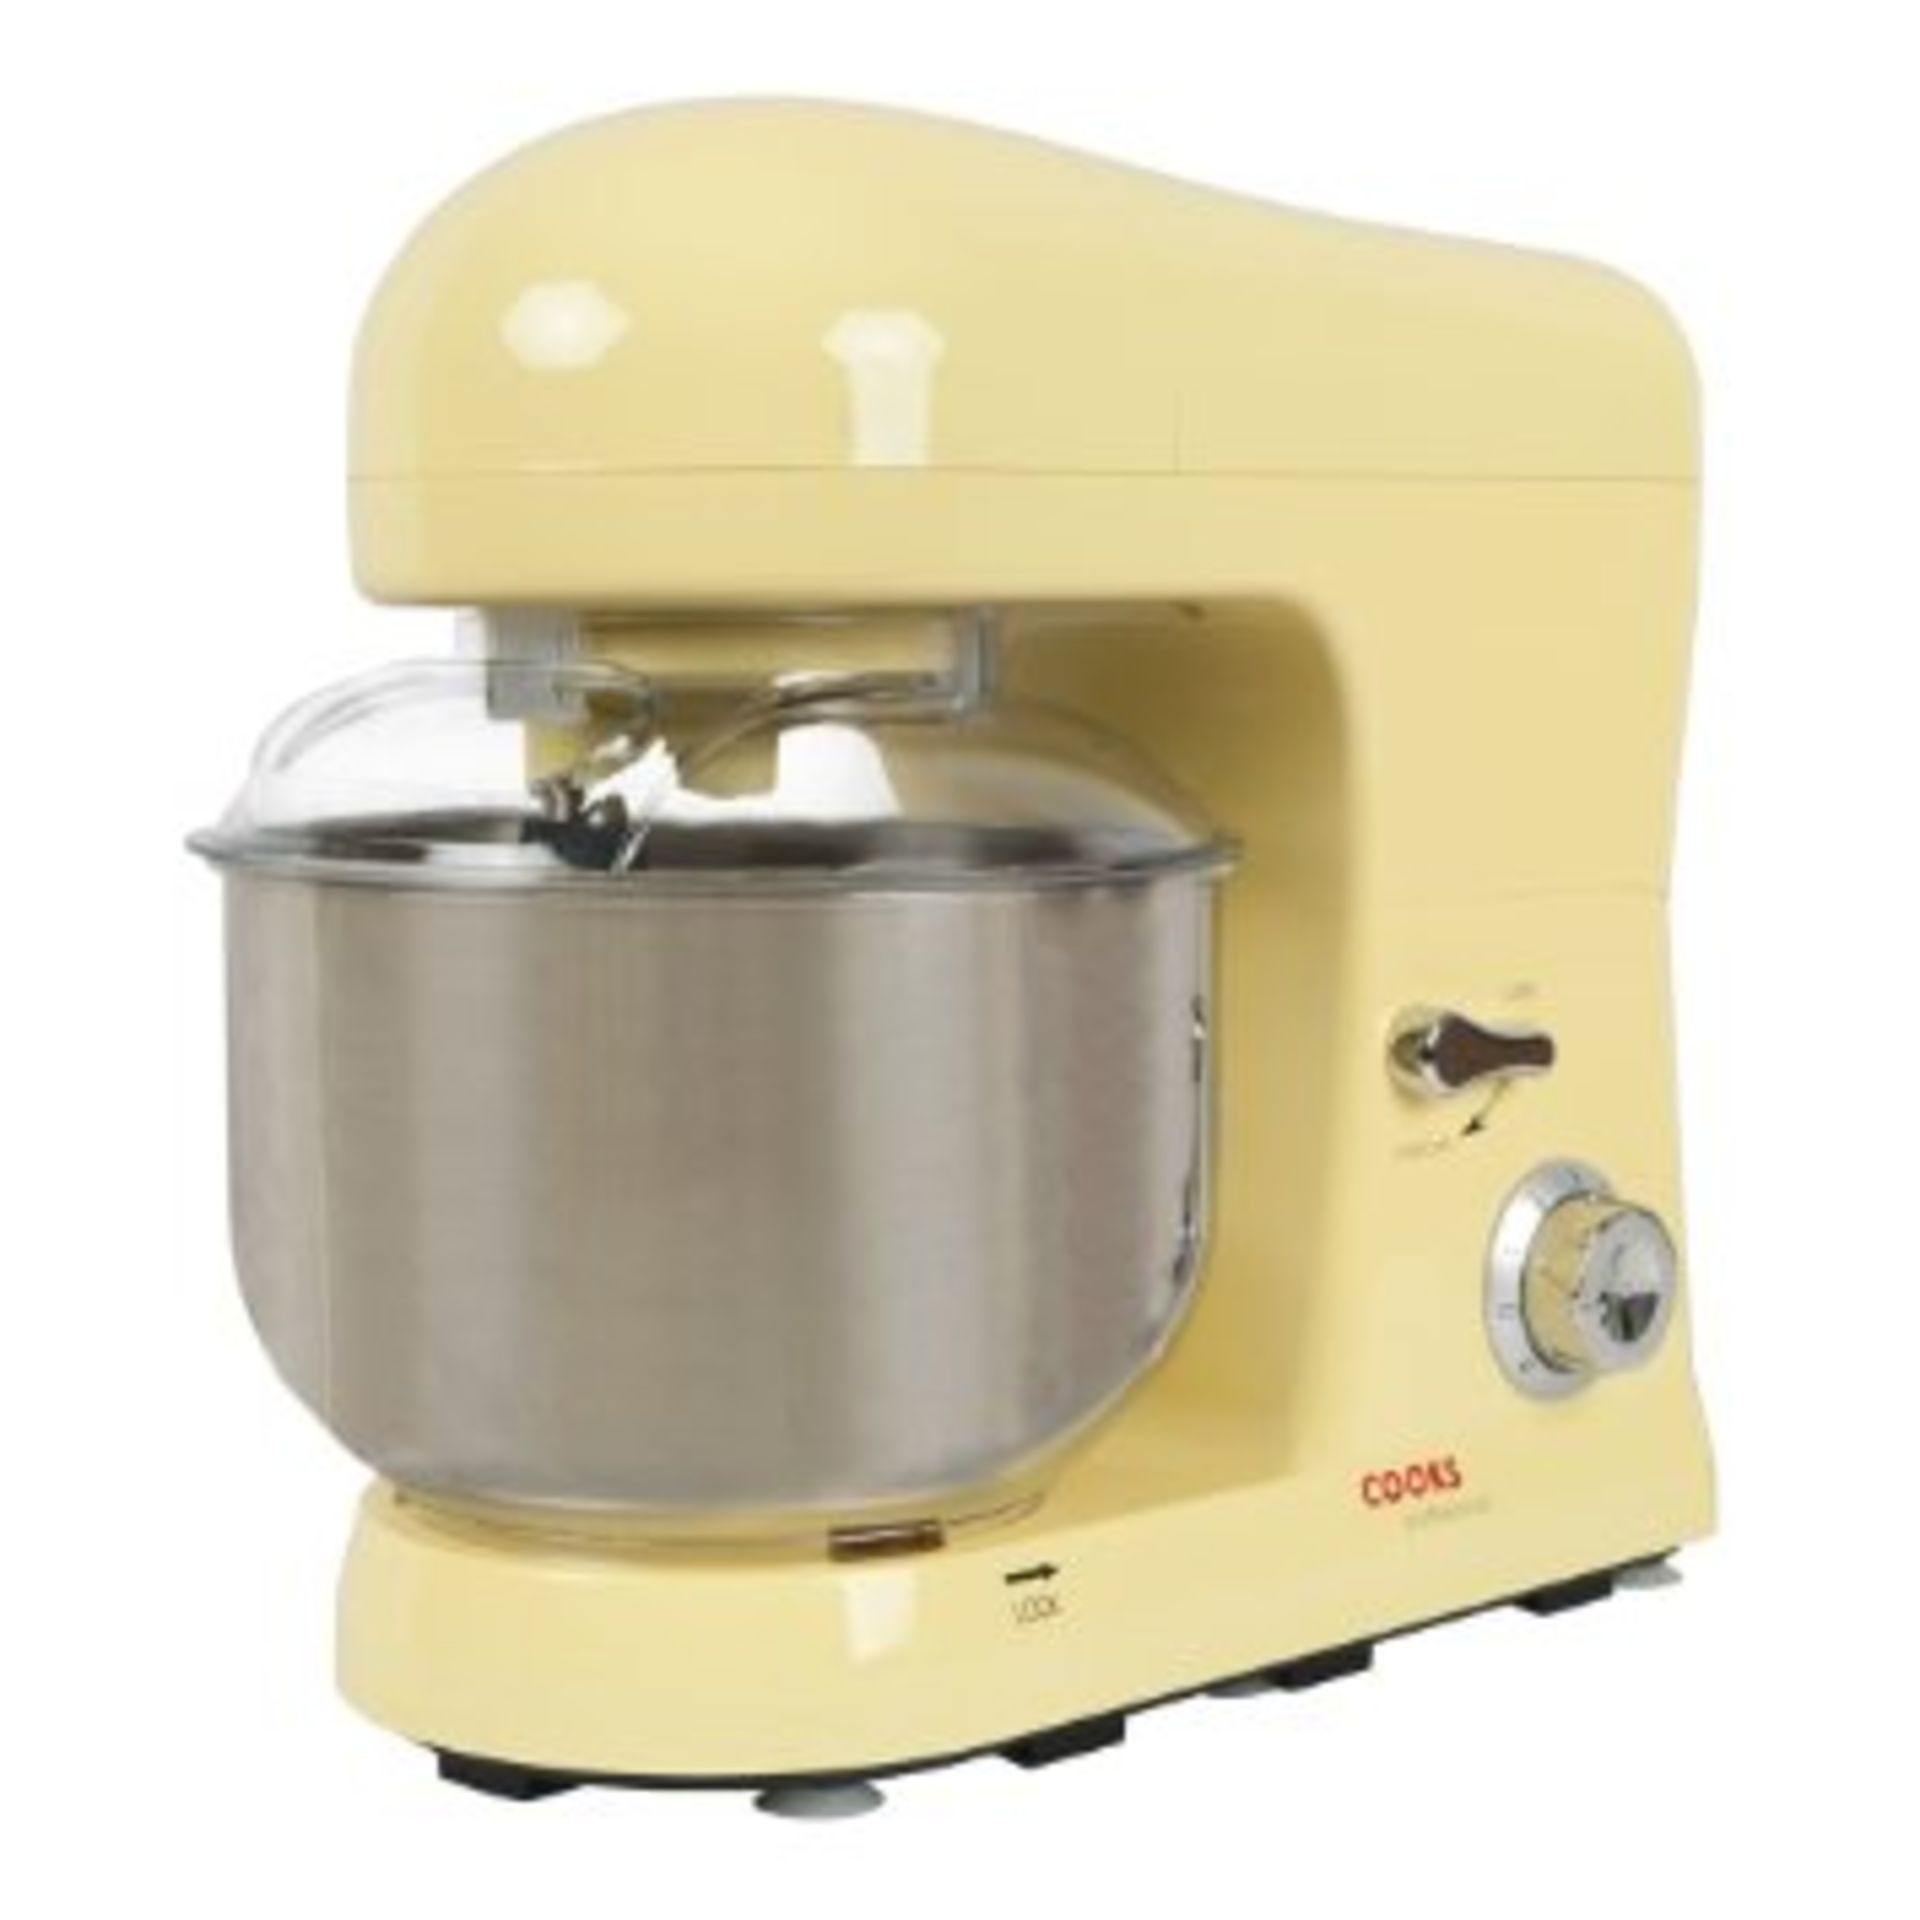 V Grade U Cooks Professional 800W Cream Stand Mixer (Note item is in box picturing silver mixer)